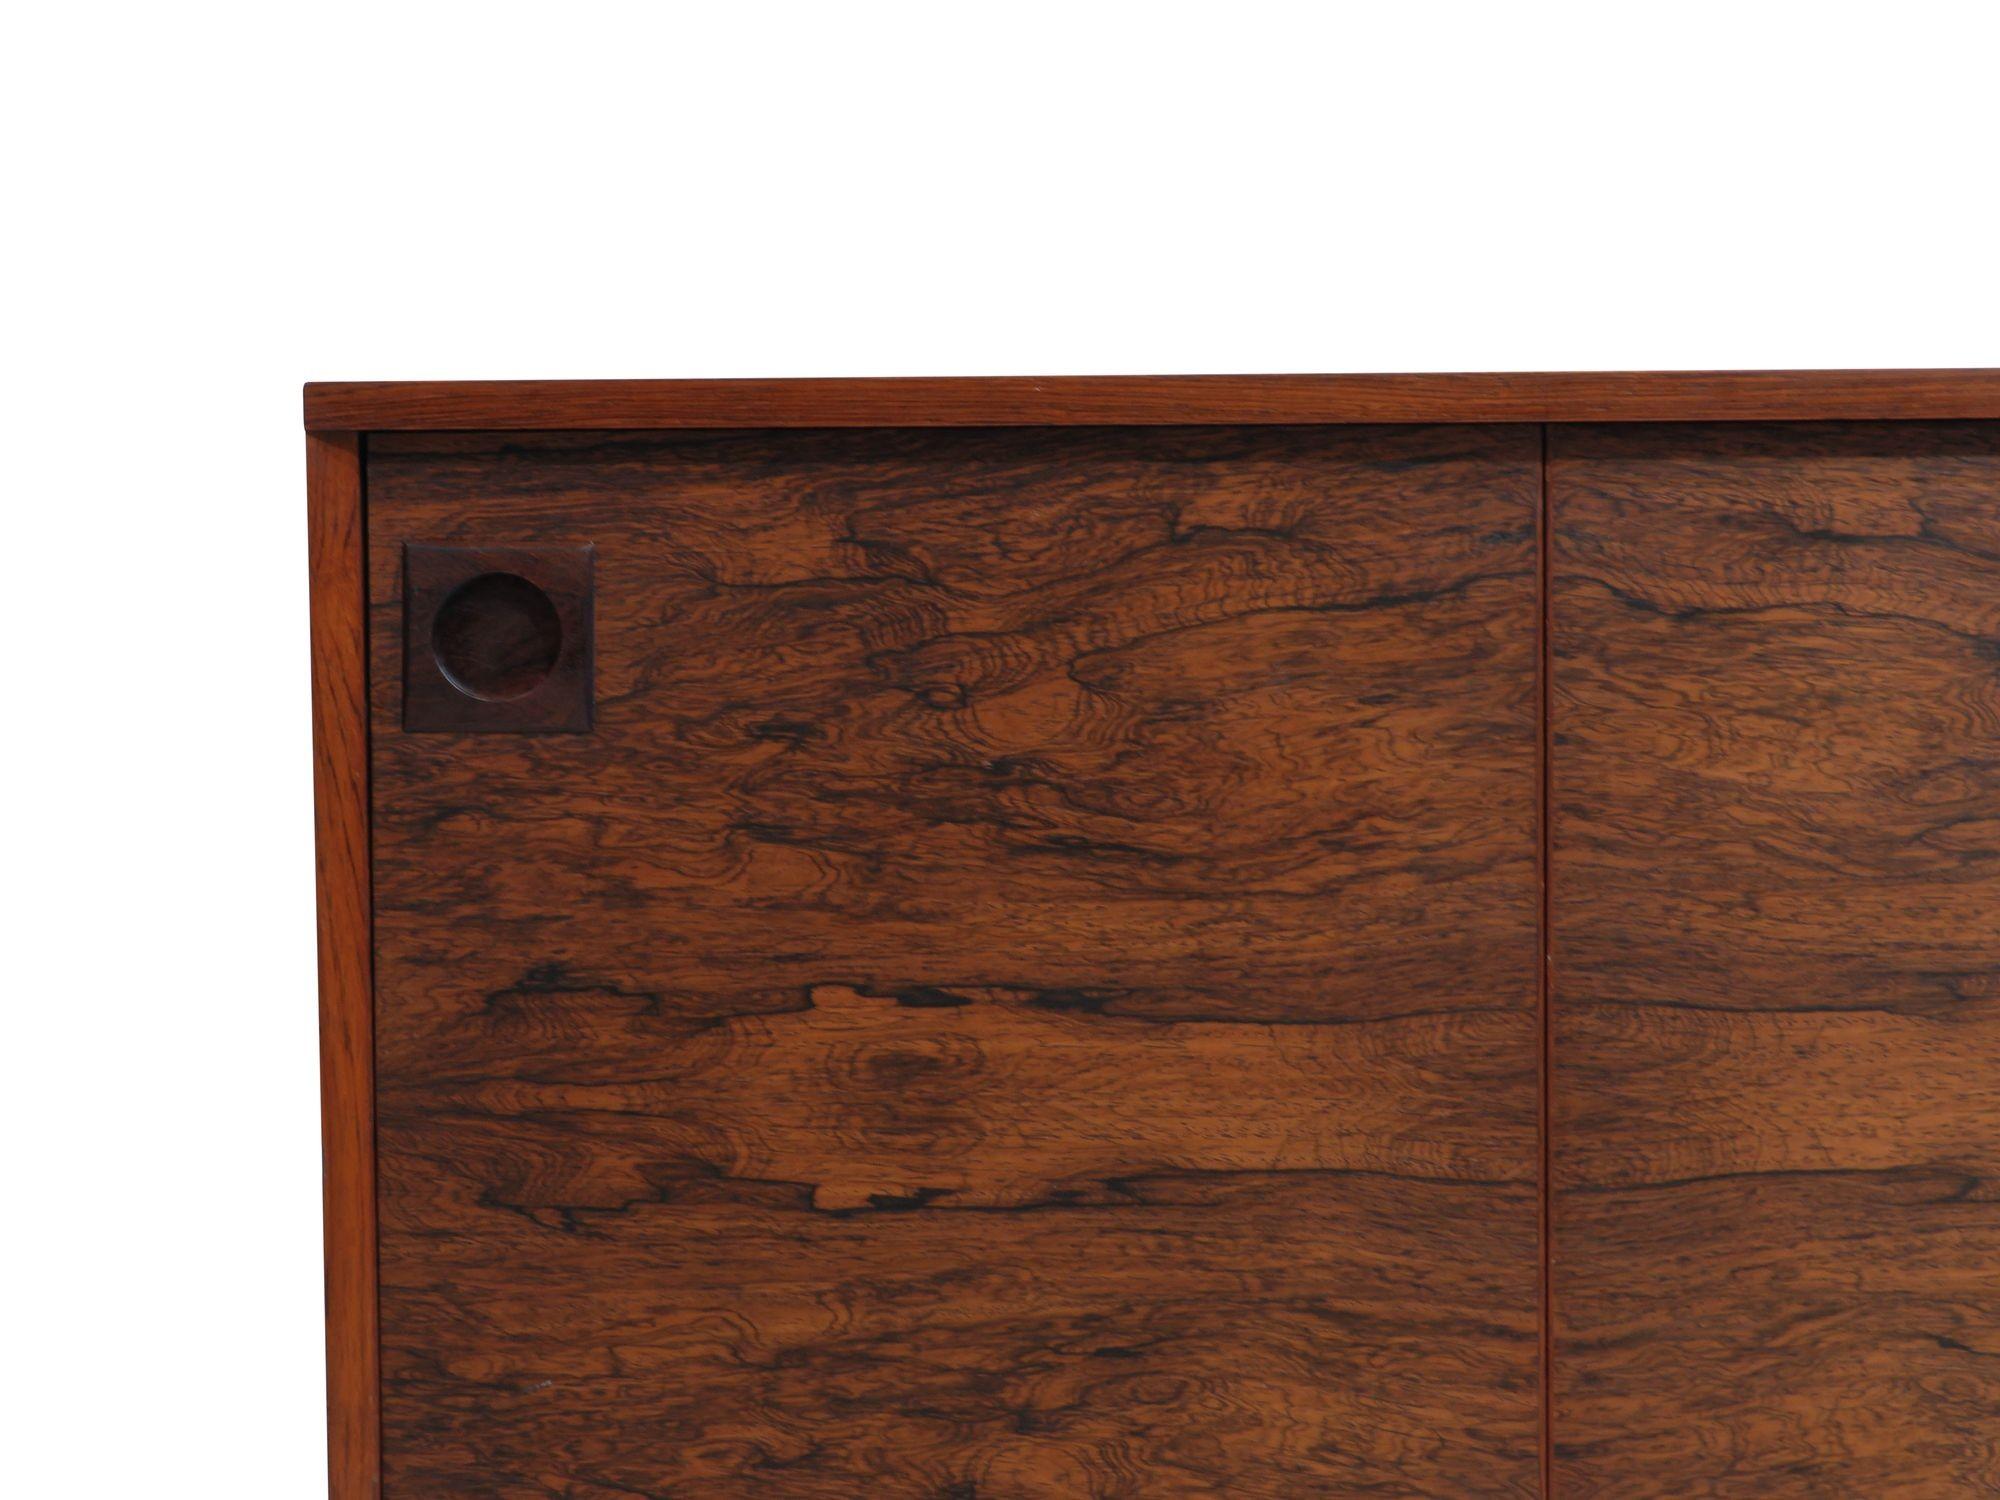 Finely crafted Brazilian rosewood cabinet with dynamic book-matched grain on the doors with unique sliding door mechanism, bullet-shaped brass hinges and sculpted pulls. The interior is finished in rosewood with adjustable shelves and a felt lined